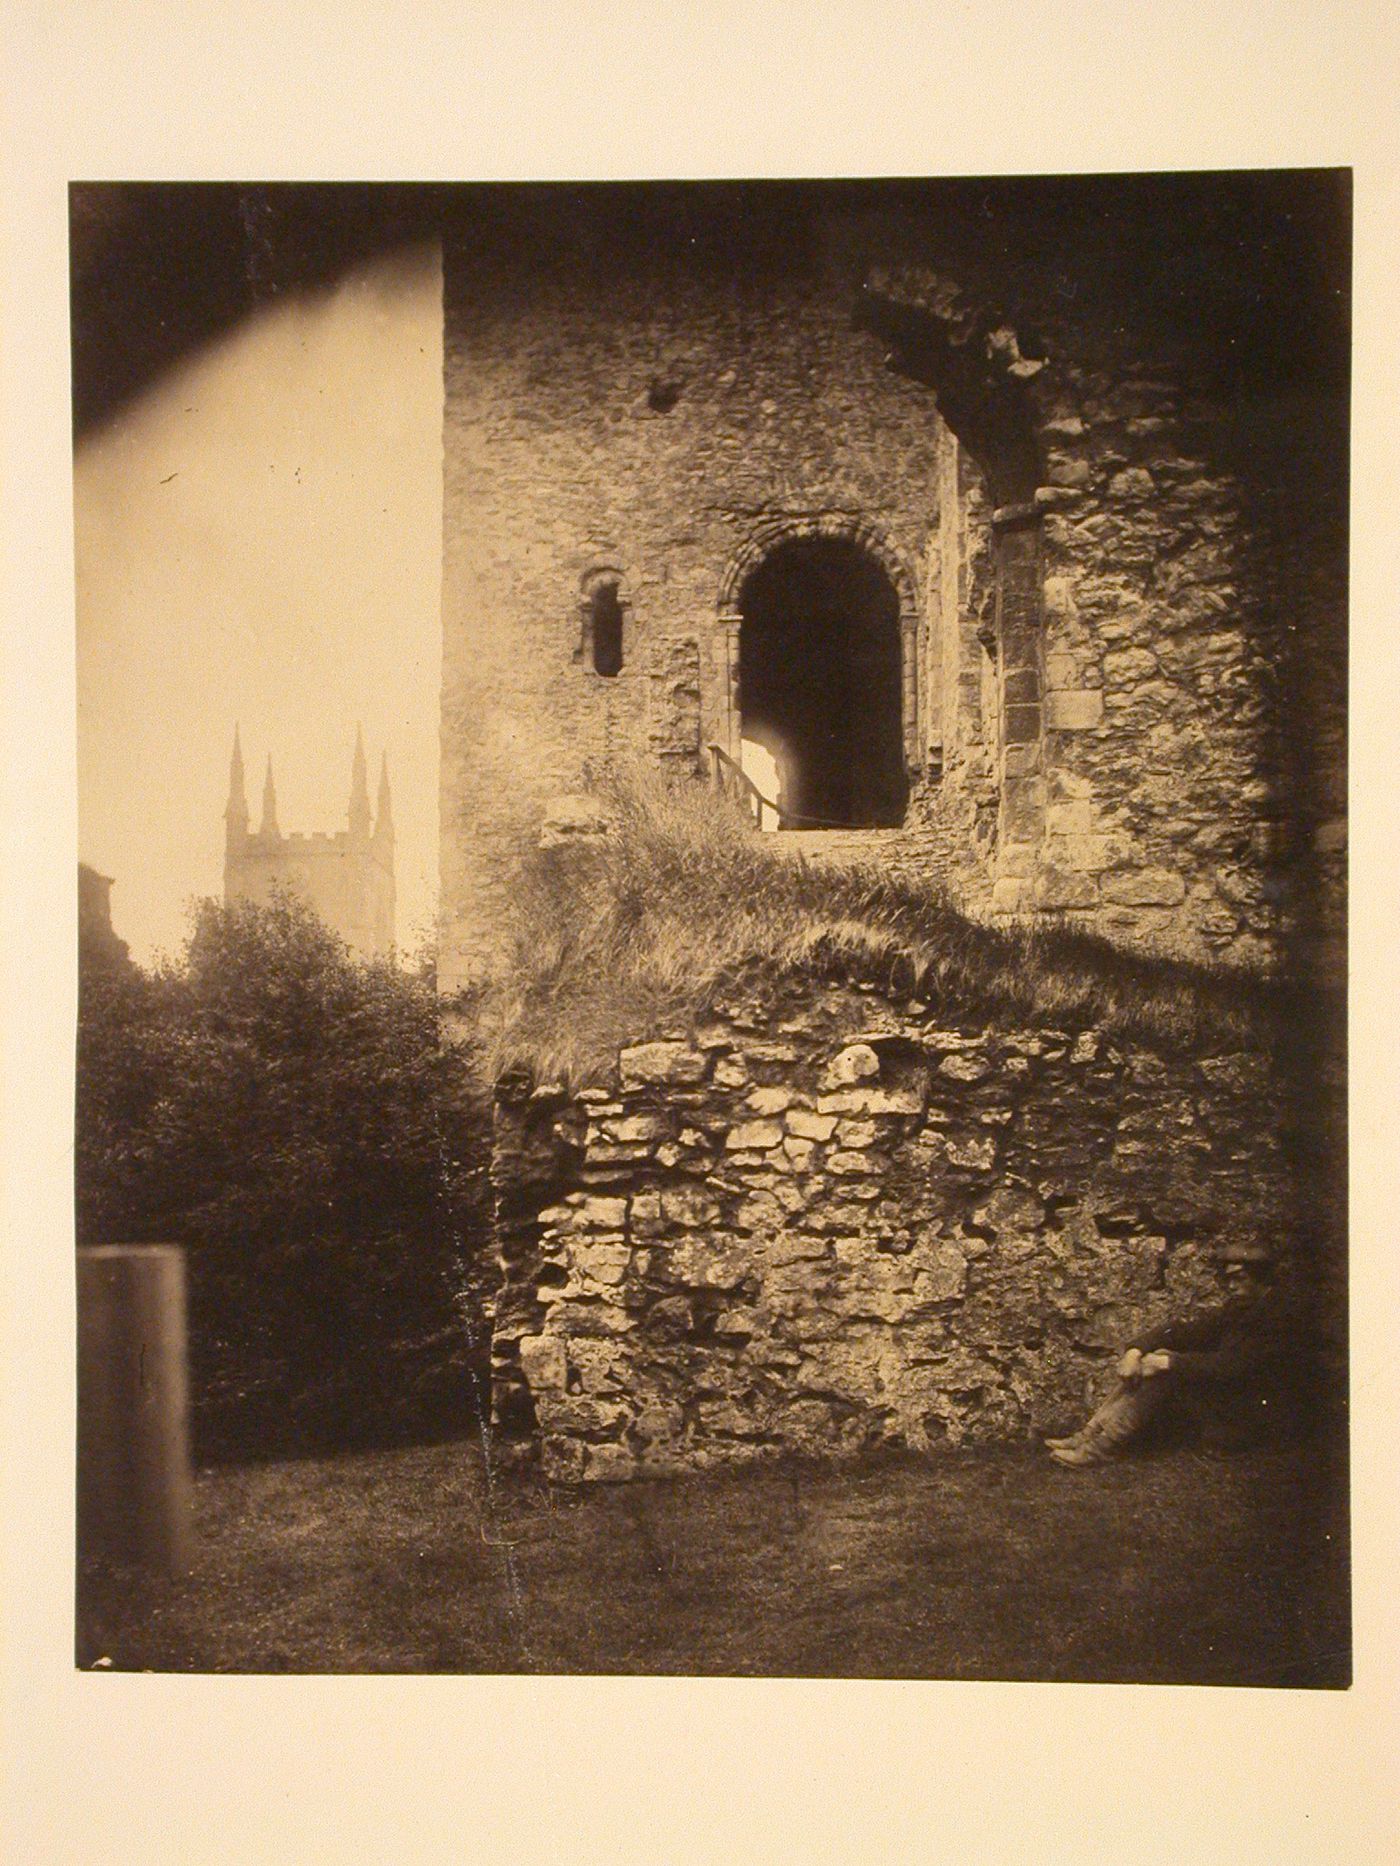 Man seated near stone wall and tower, England ?